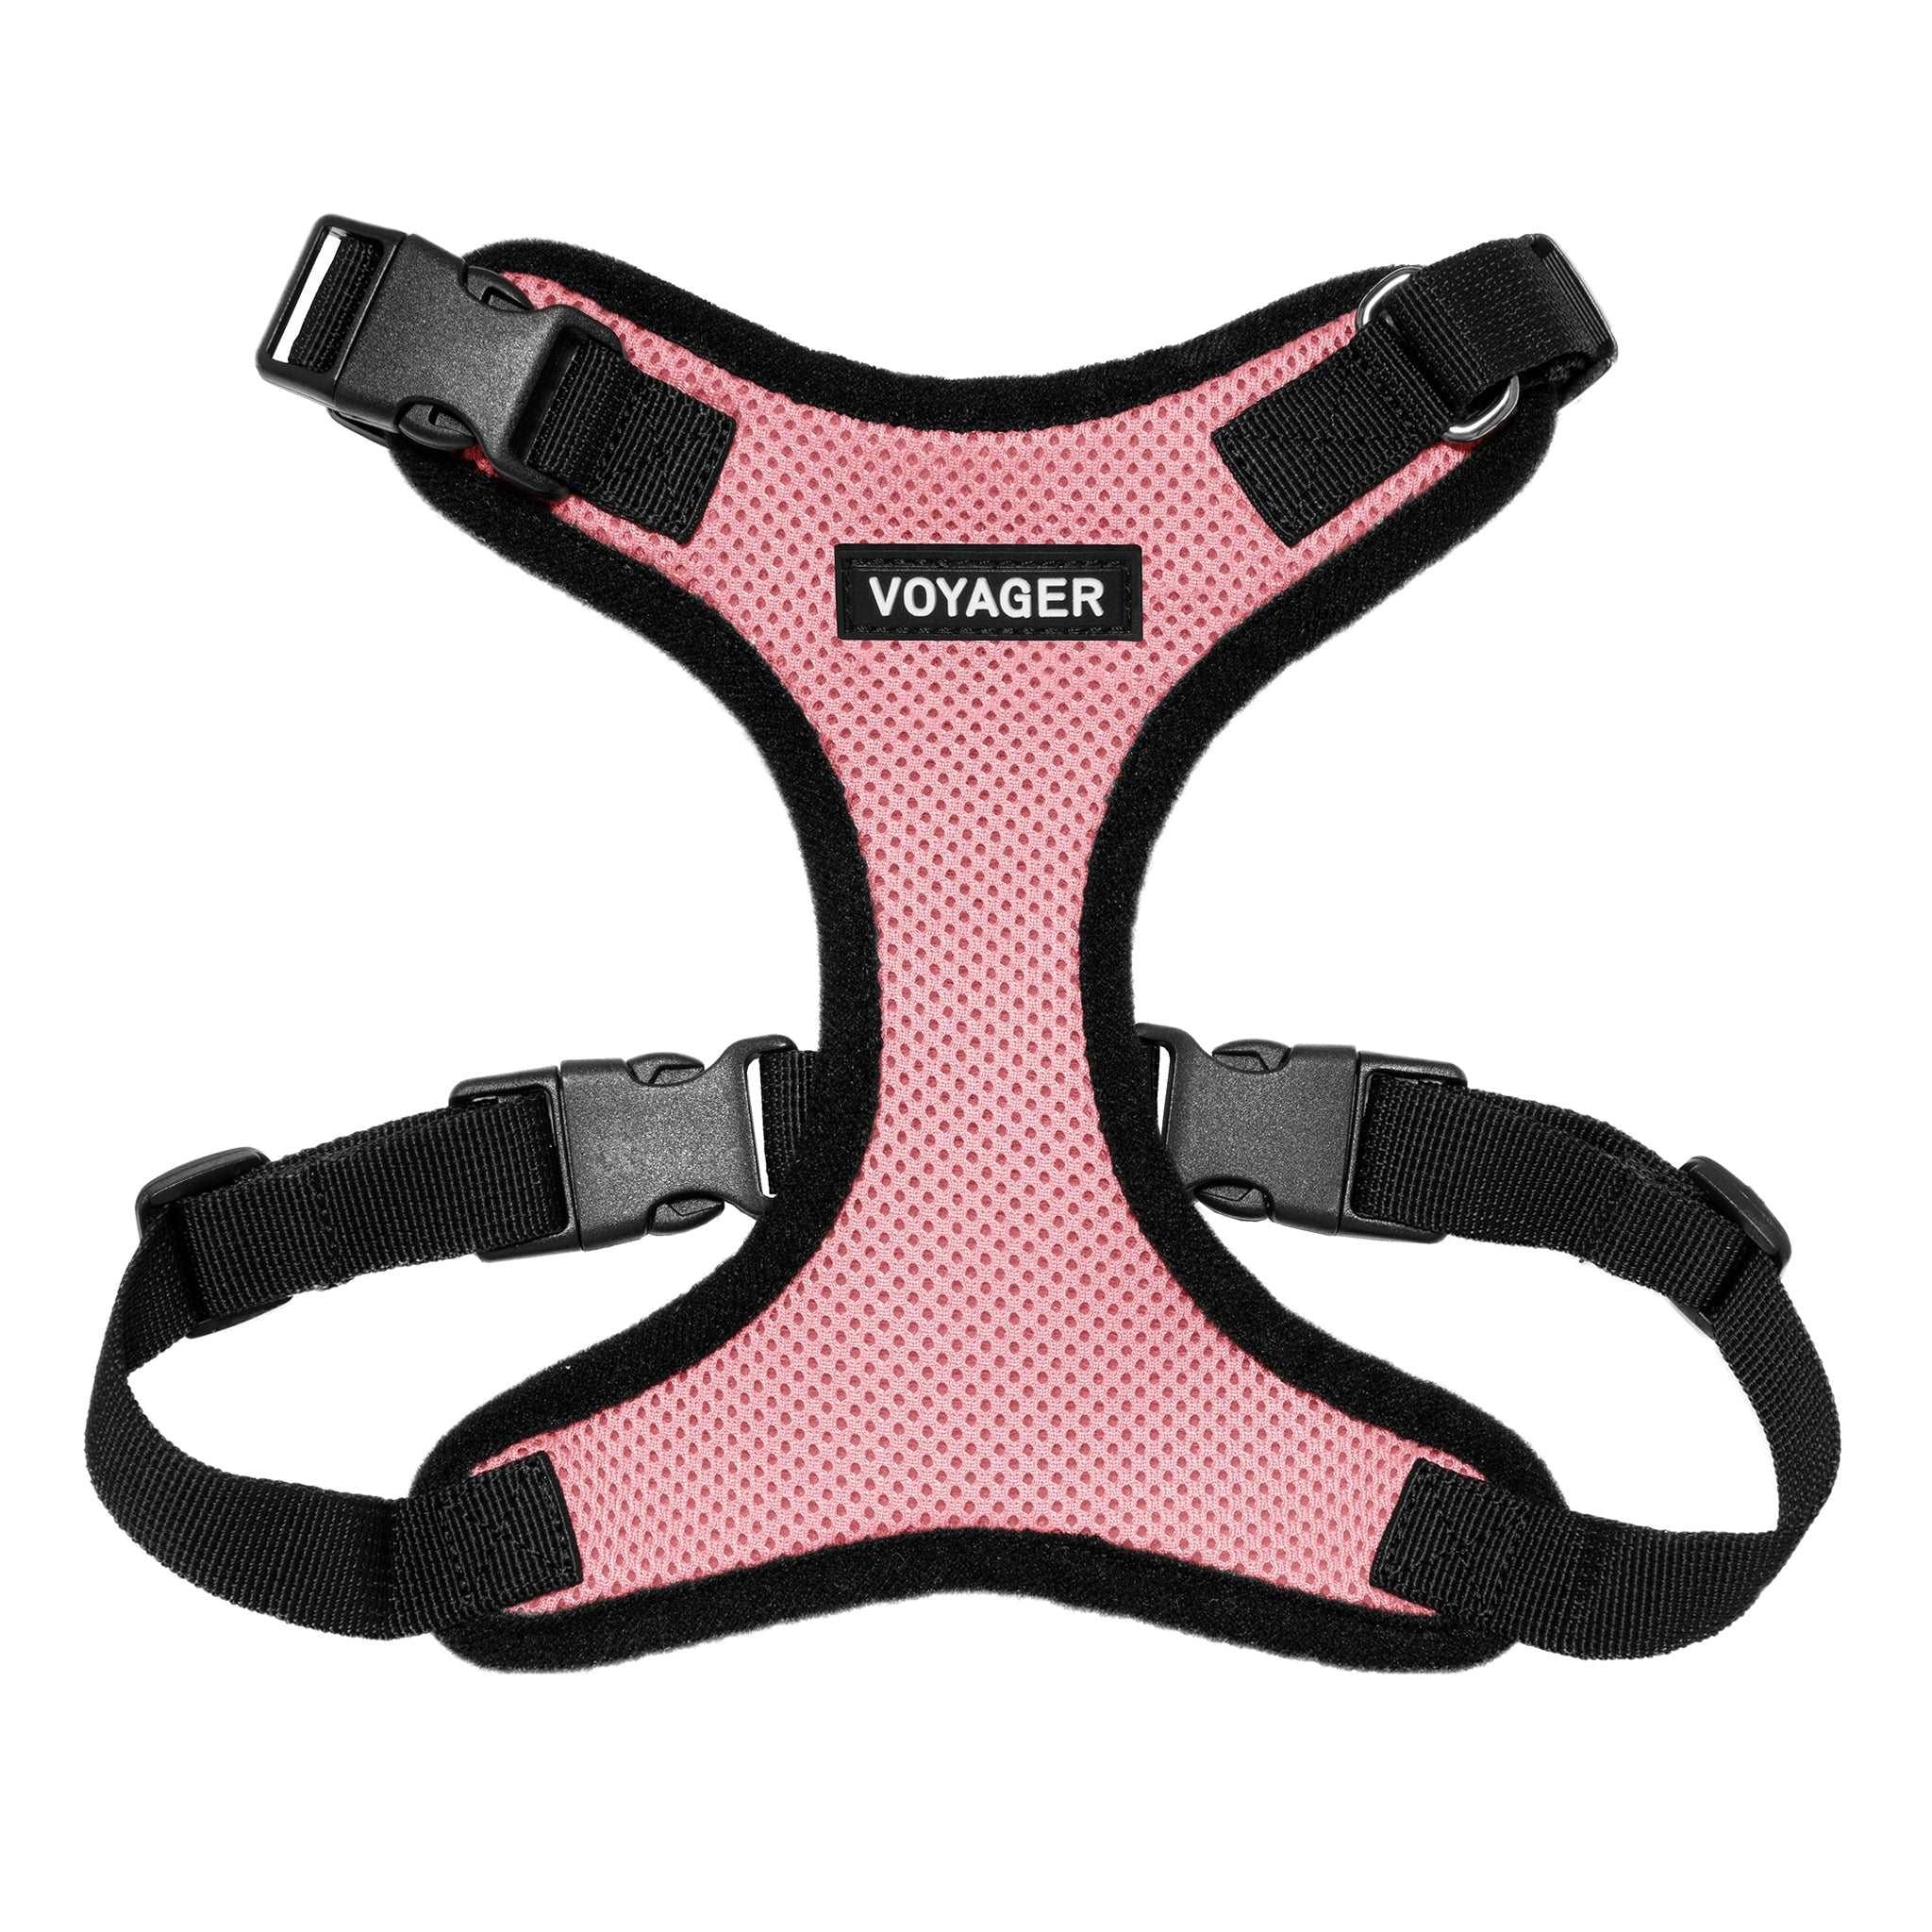 VOYAGER Step-In Lock Dog Harness in Pink with Black Trim and Webbing - Front